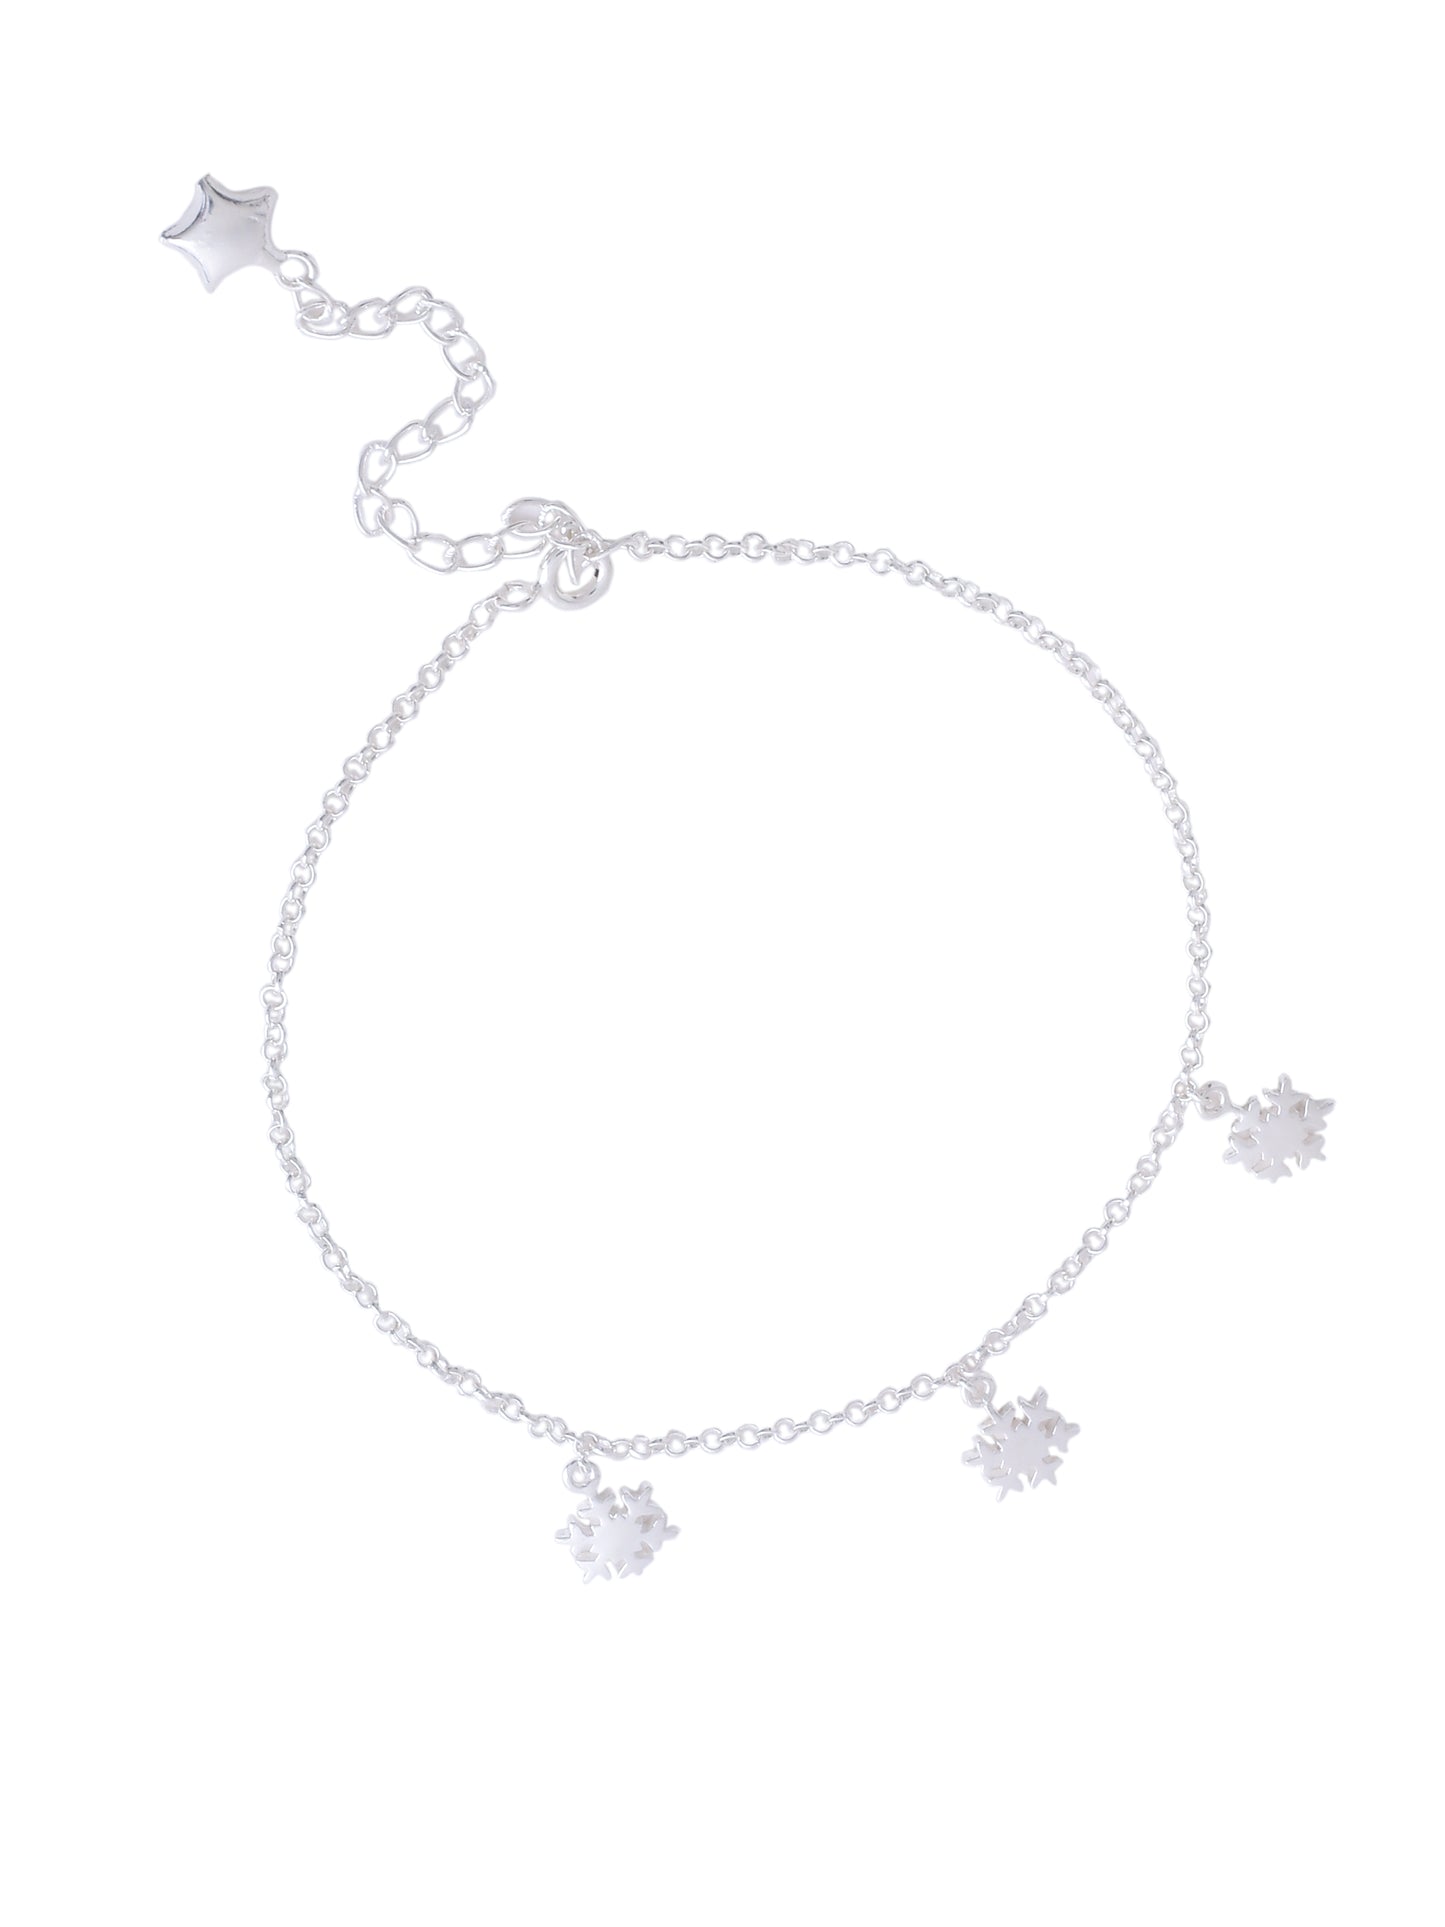 Frosty Elegance: Sterling Silver Snowflake Charm Anklet